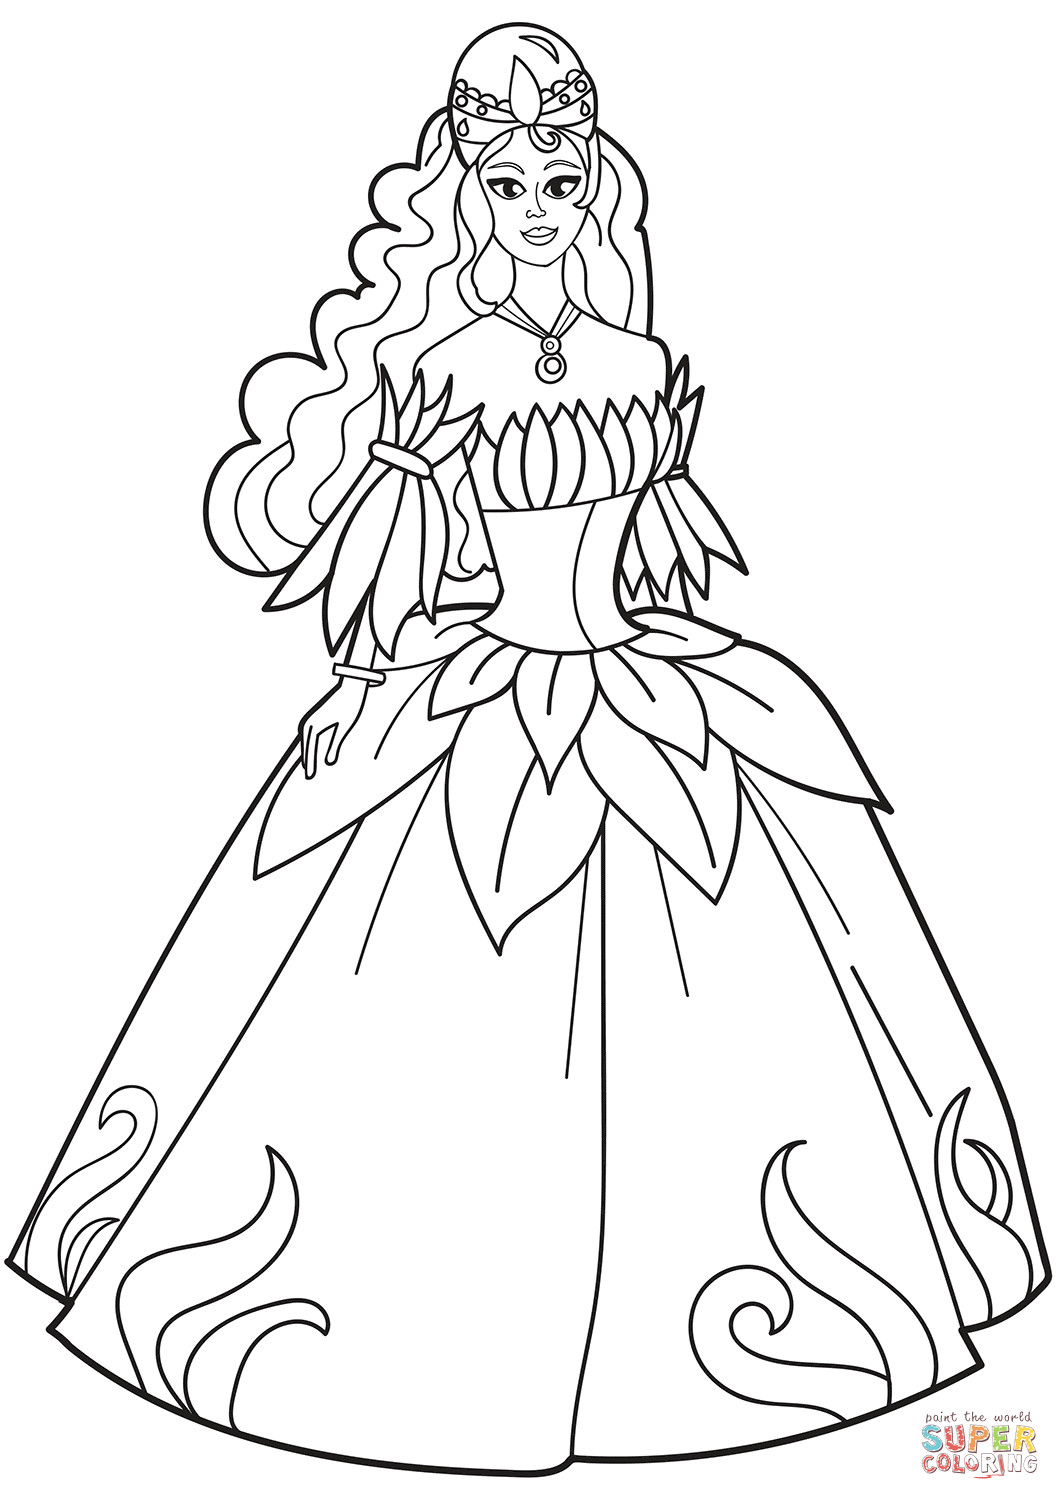 Princess Coloring Books For Girls
 Princess in Flower Dress coloring page